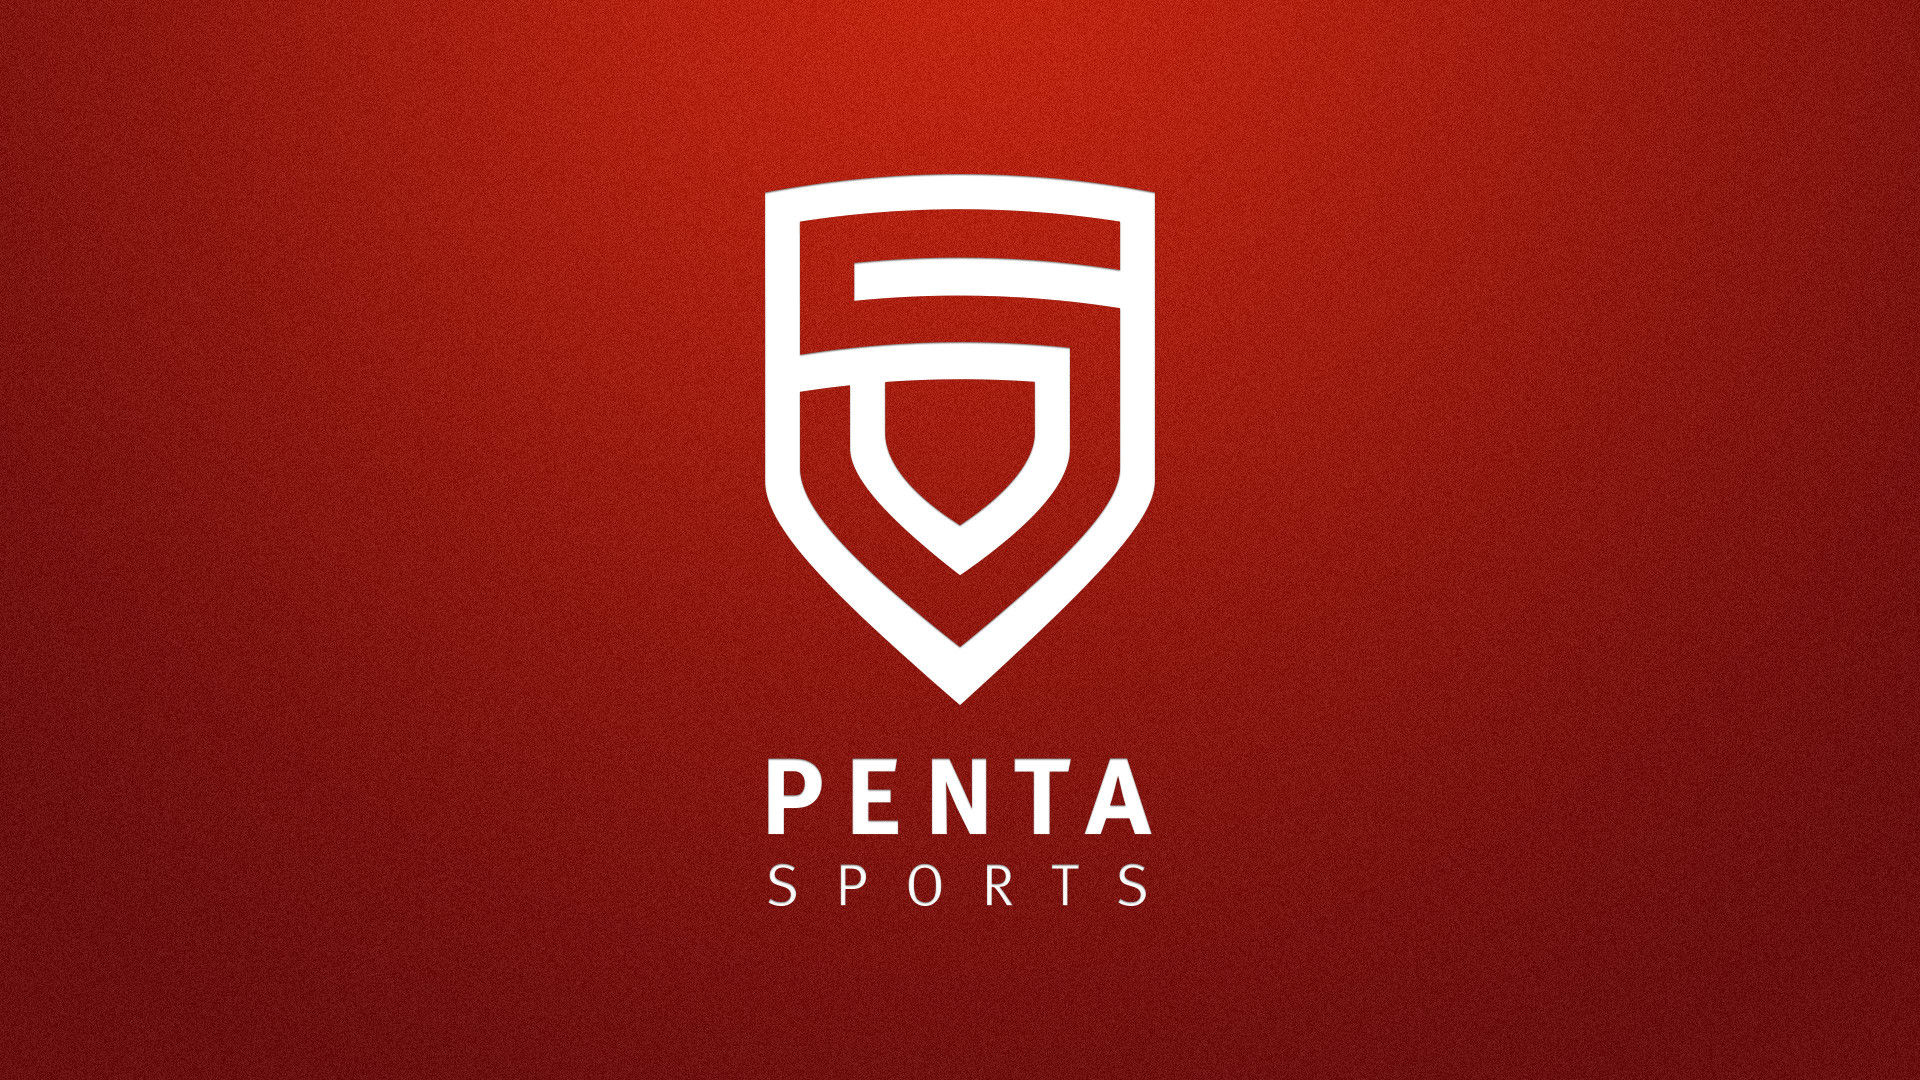 1920x1080 We've collated five awesome Penta Sports wallpapers every Penta Sports fan  should have.